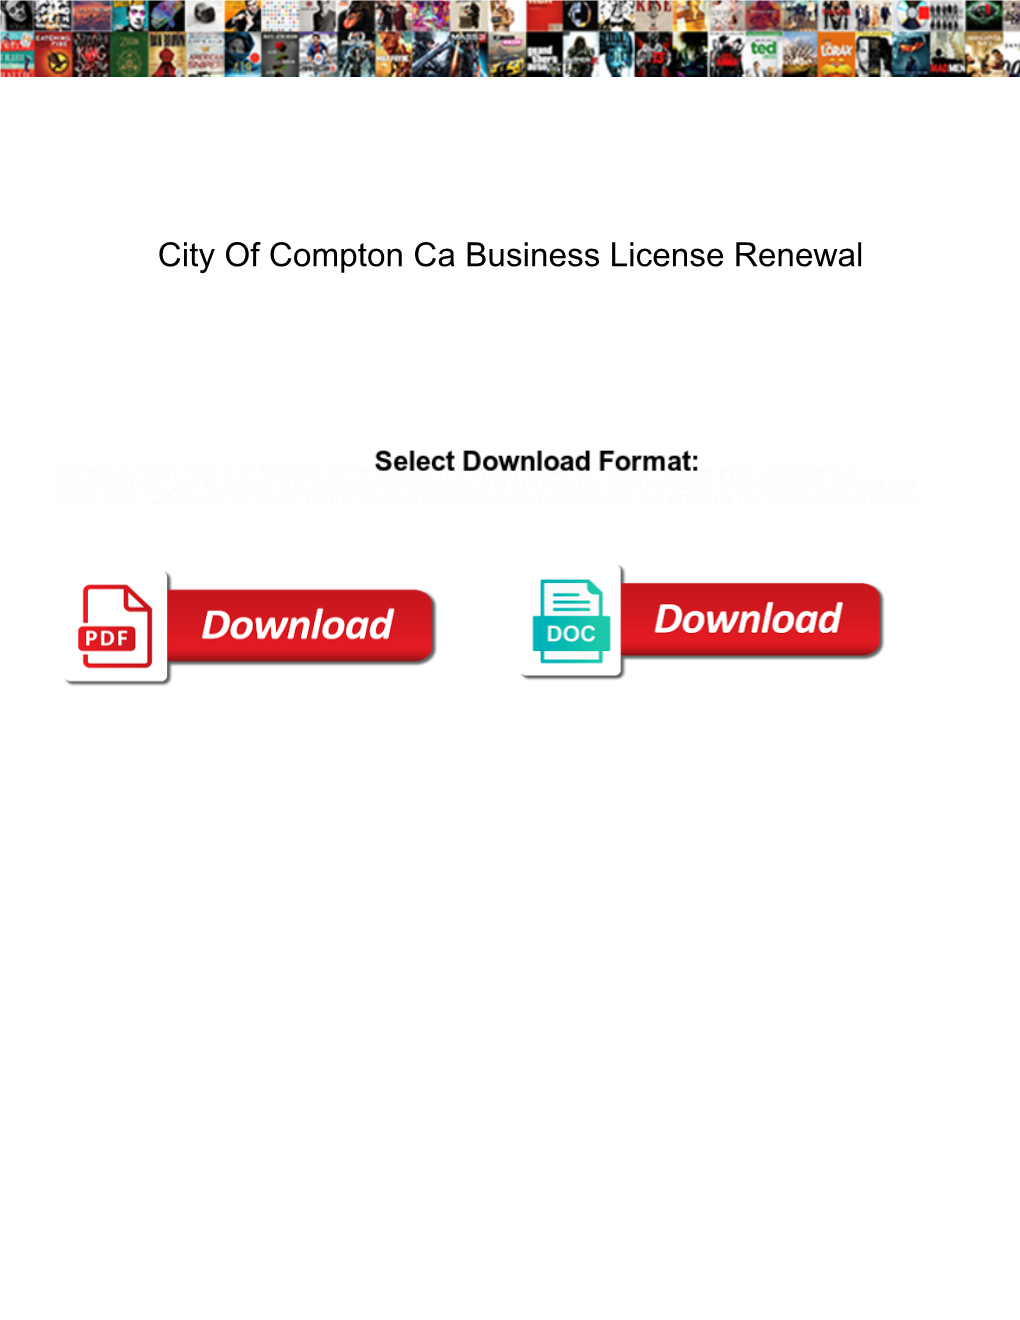 City of Compton Ca Business License Renewal